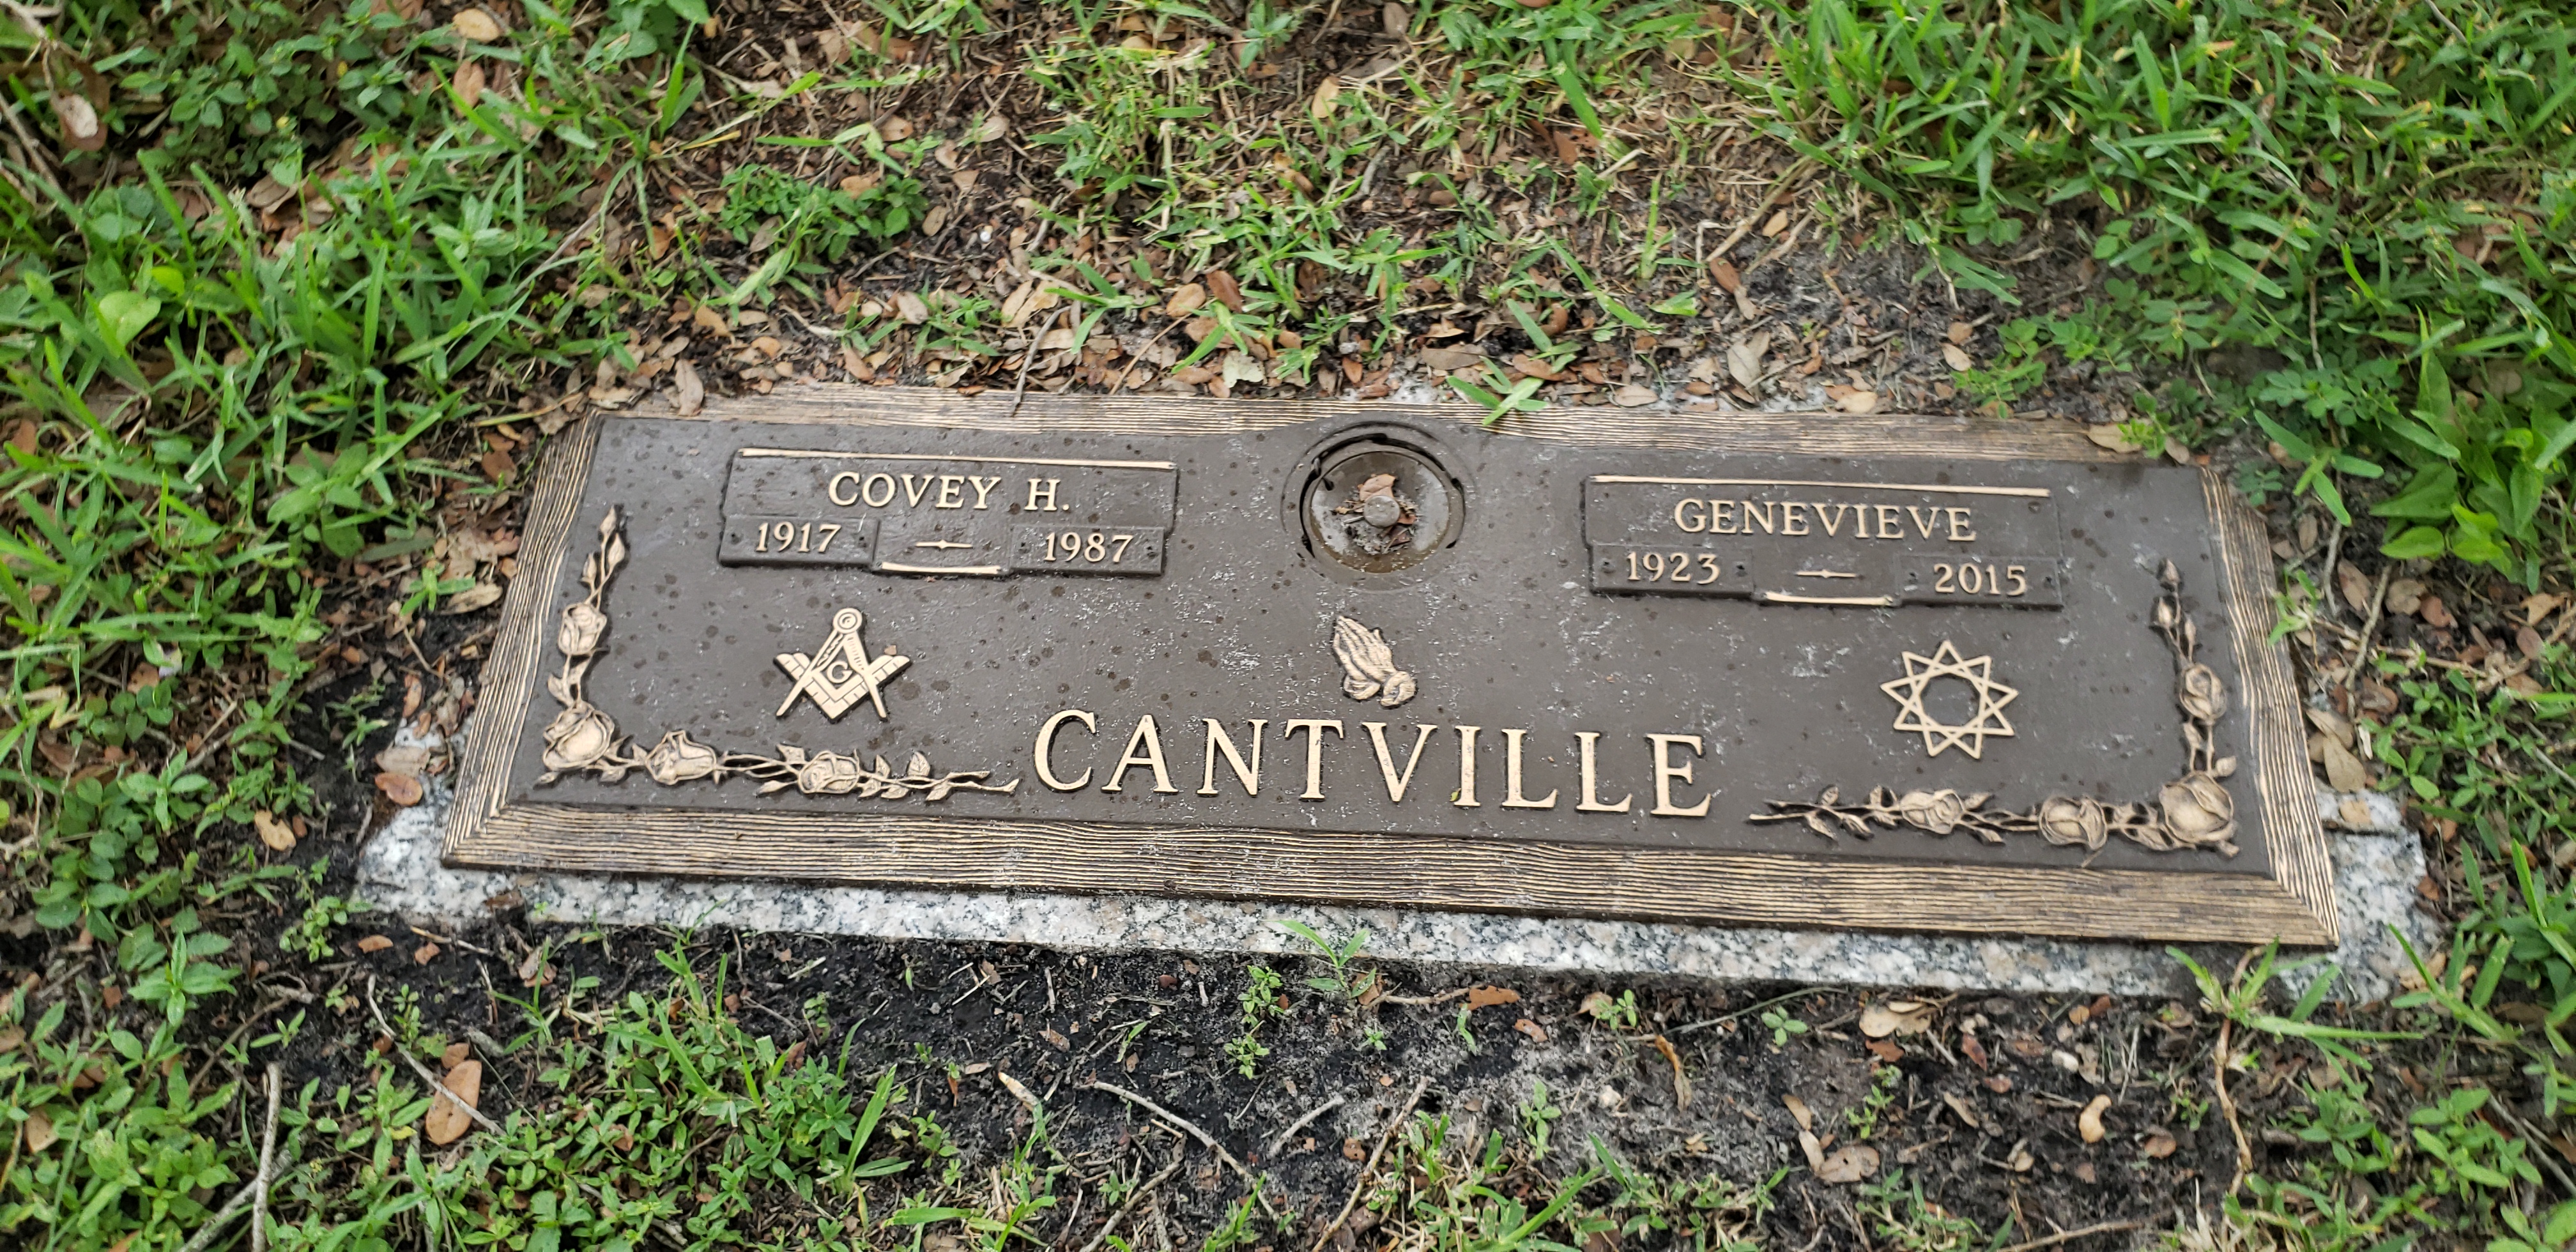 Covey H Cantville